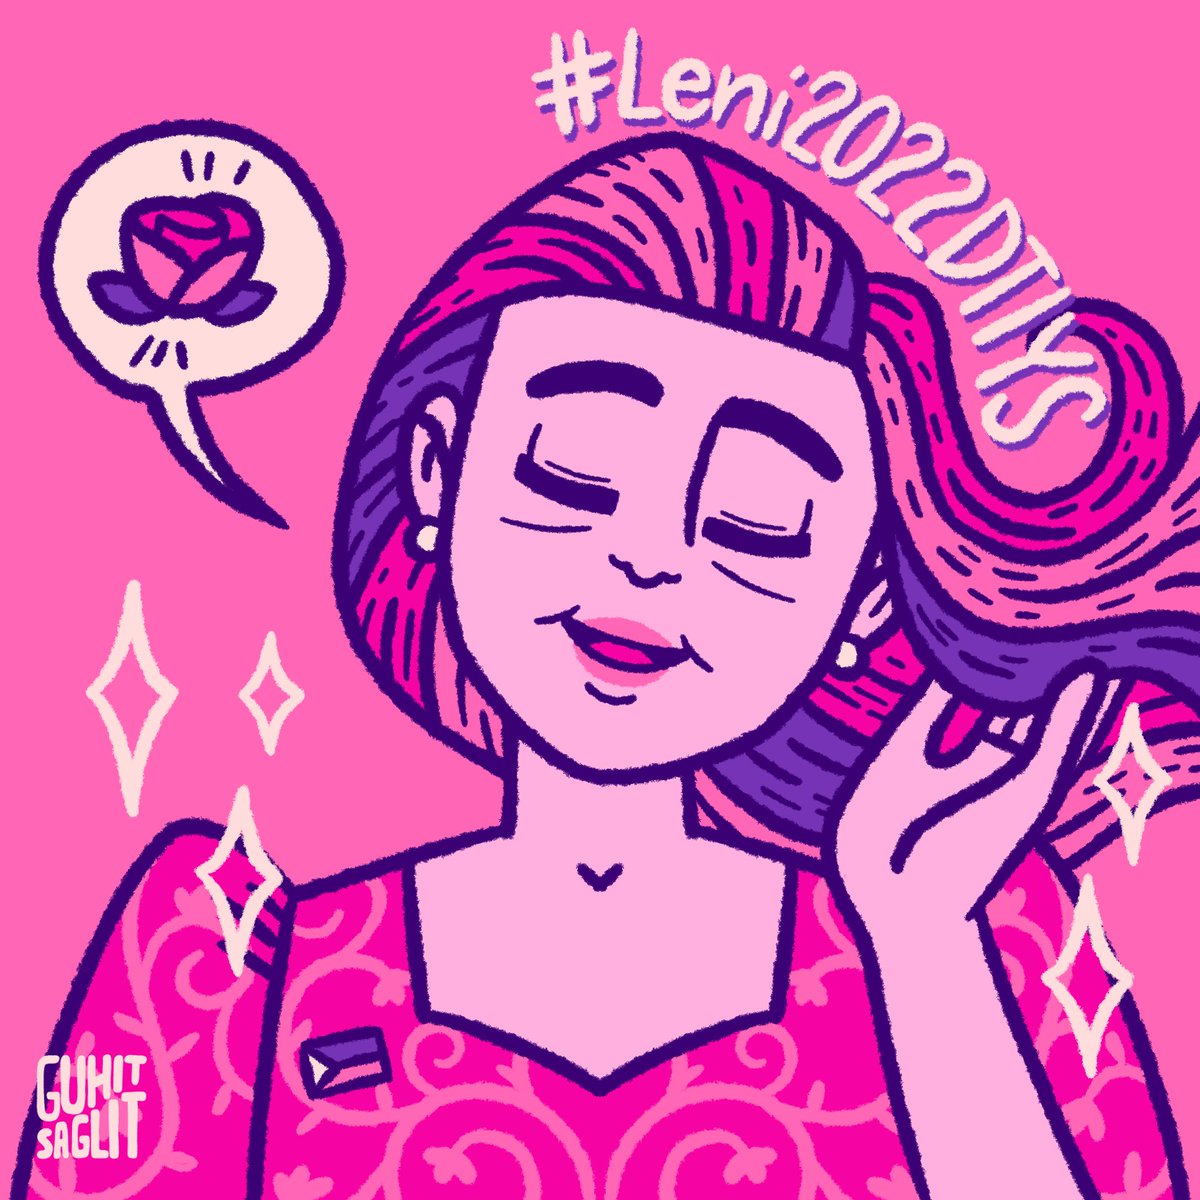 Thought id do a special Draw This In Your Style for VPL since i cant join her rallies 🥺 kung gusto nyo sumali, please use the hashtag #Leni2022DTIYS para makita at ma rt ko hihi sali ka ha? 🥺👉👈 #artph #KulayRosaAngBukas 